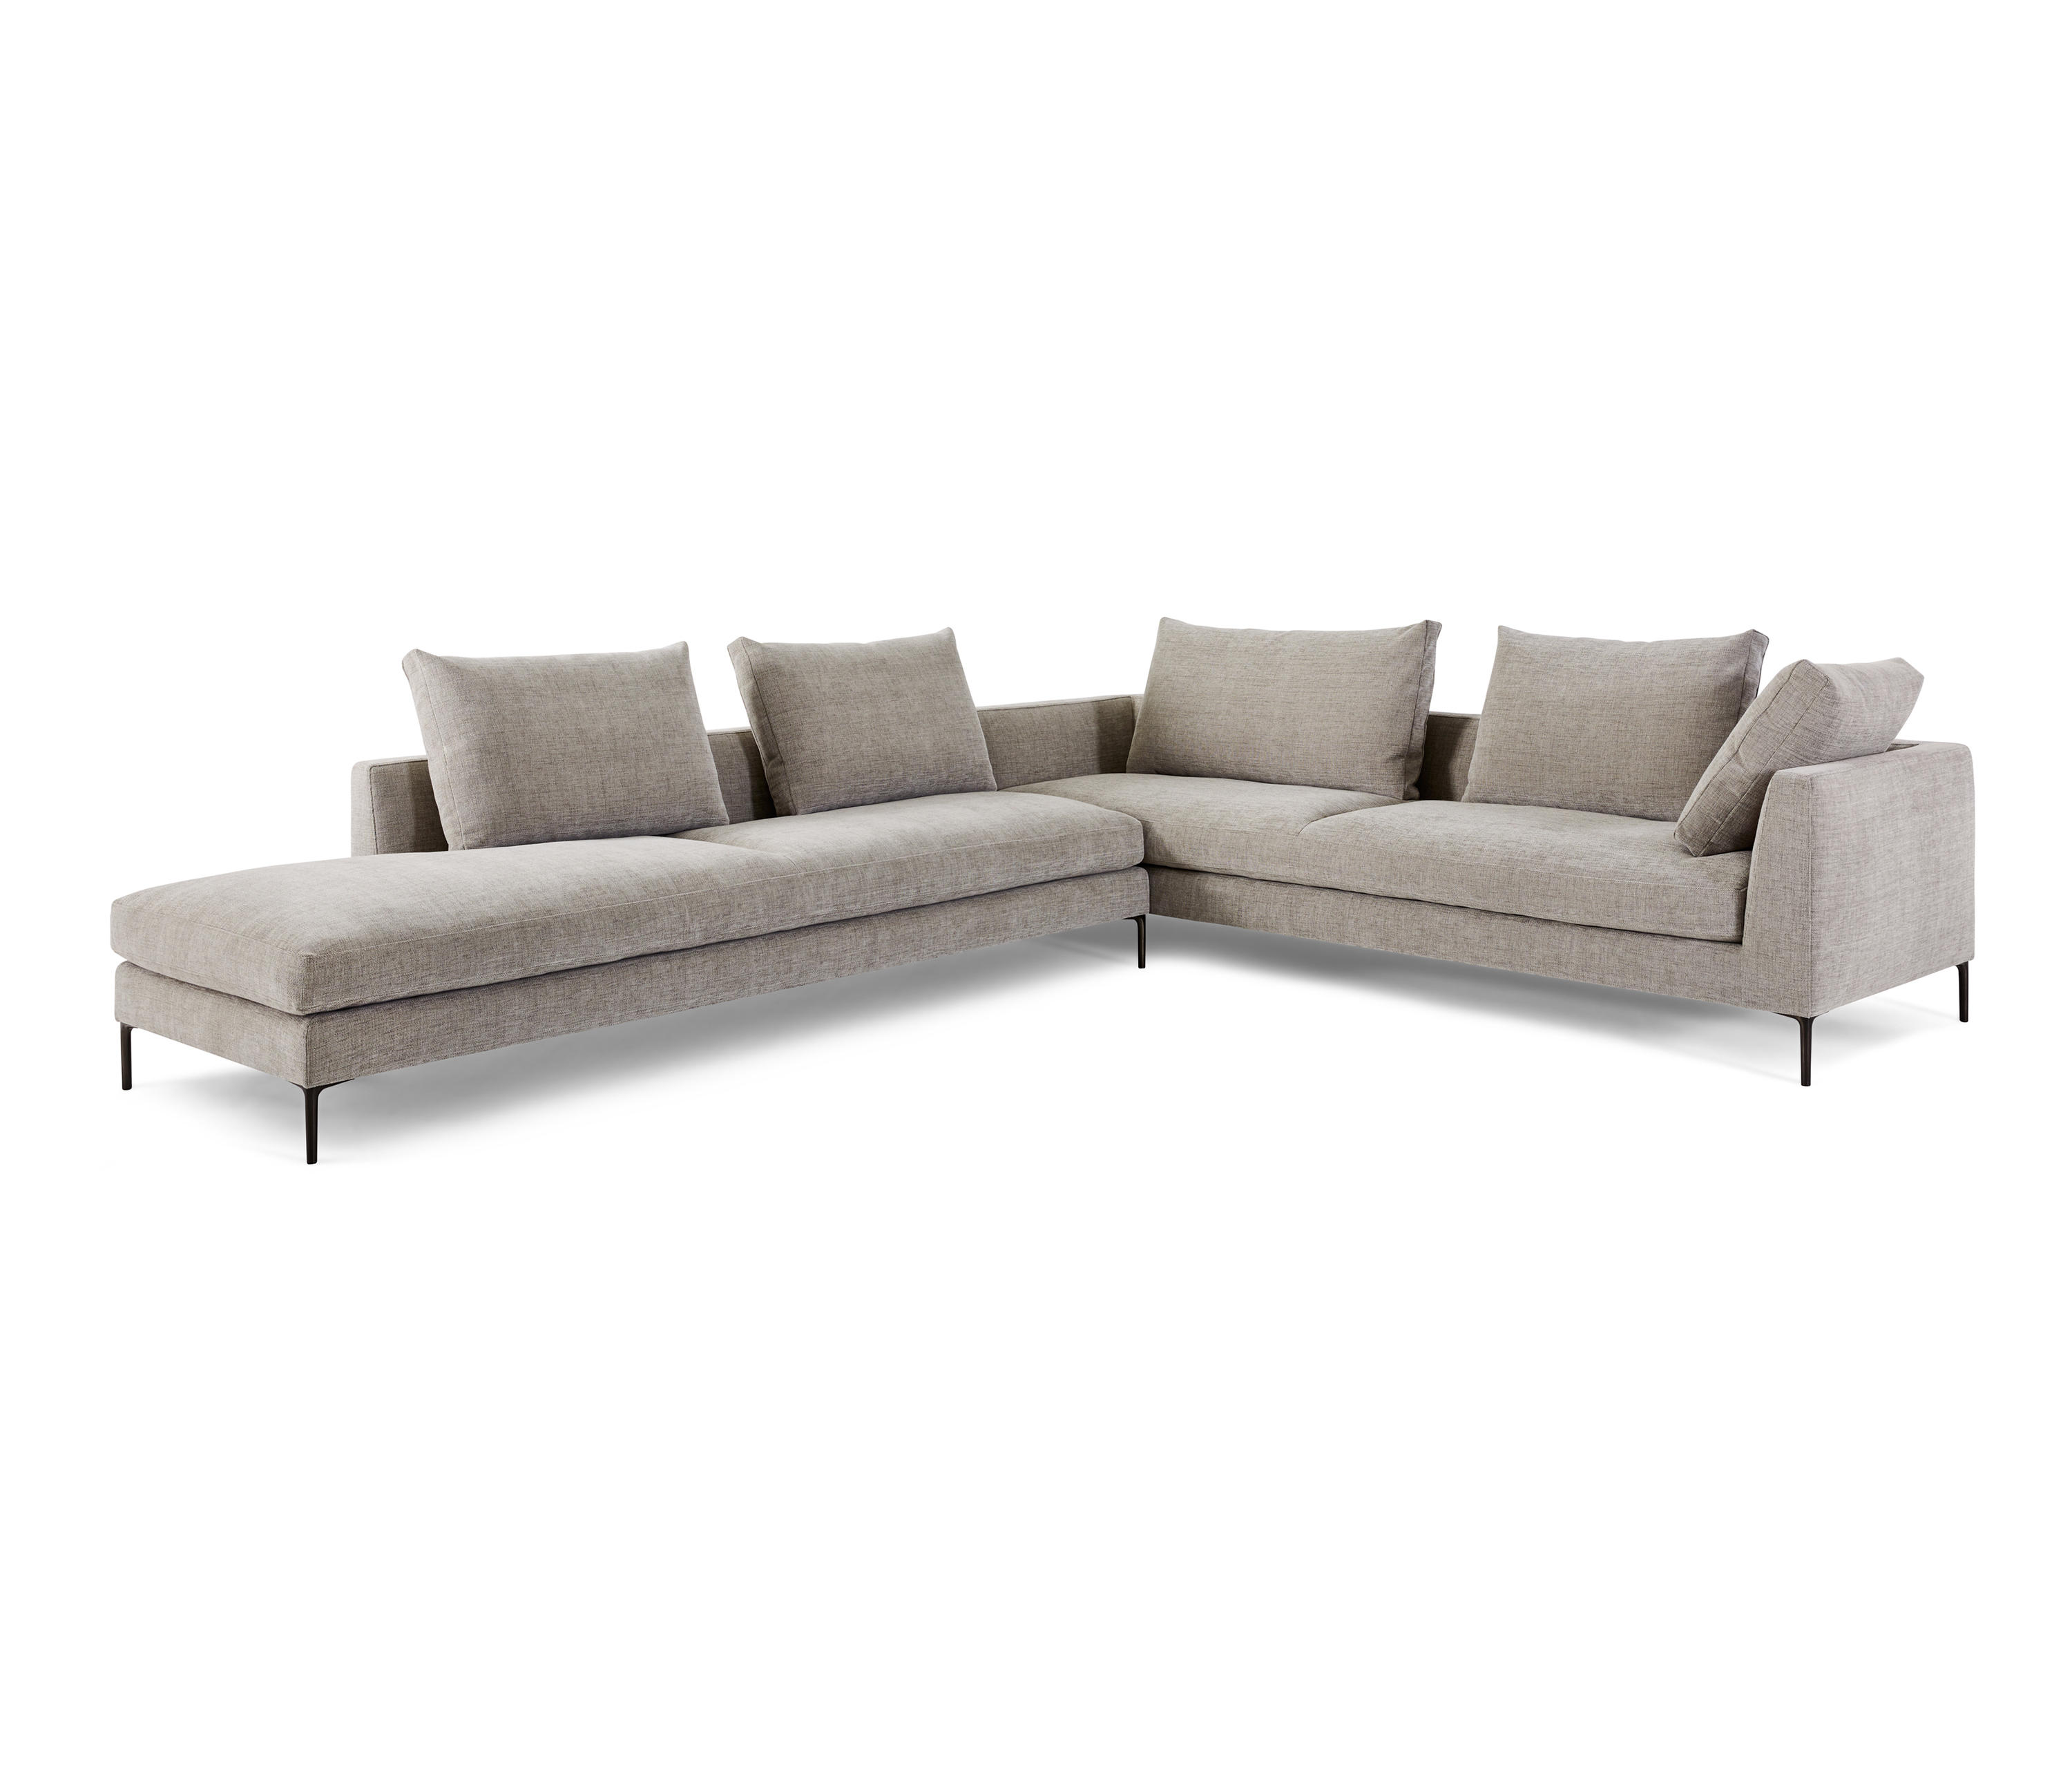 Daley Modular Sofa by Niels Bendtsen for Montis